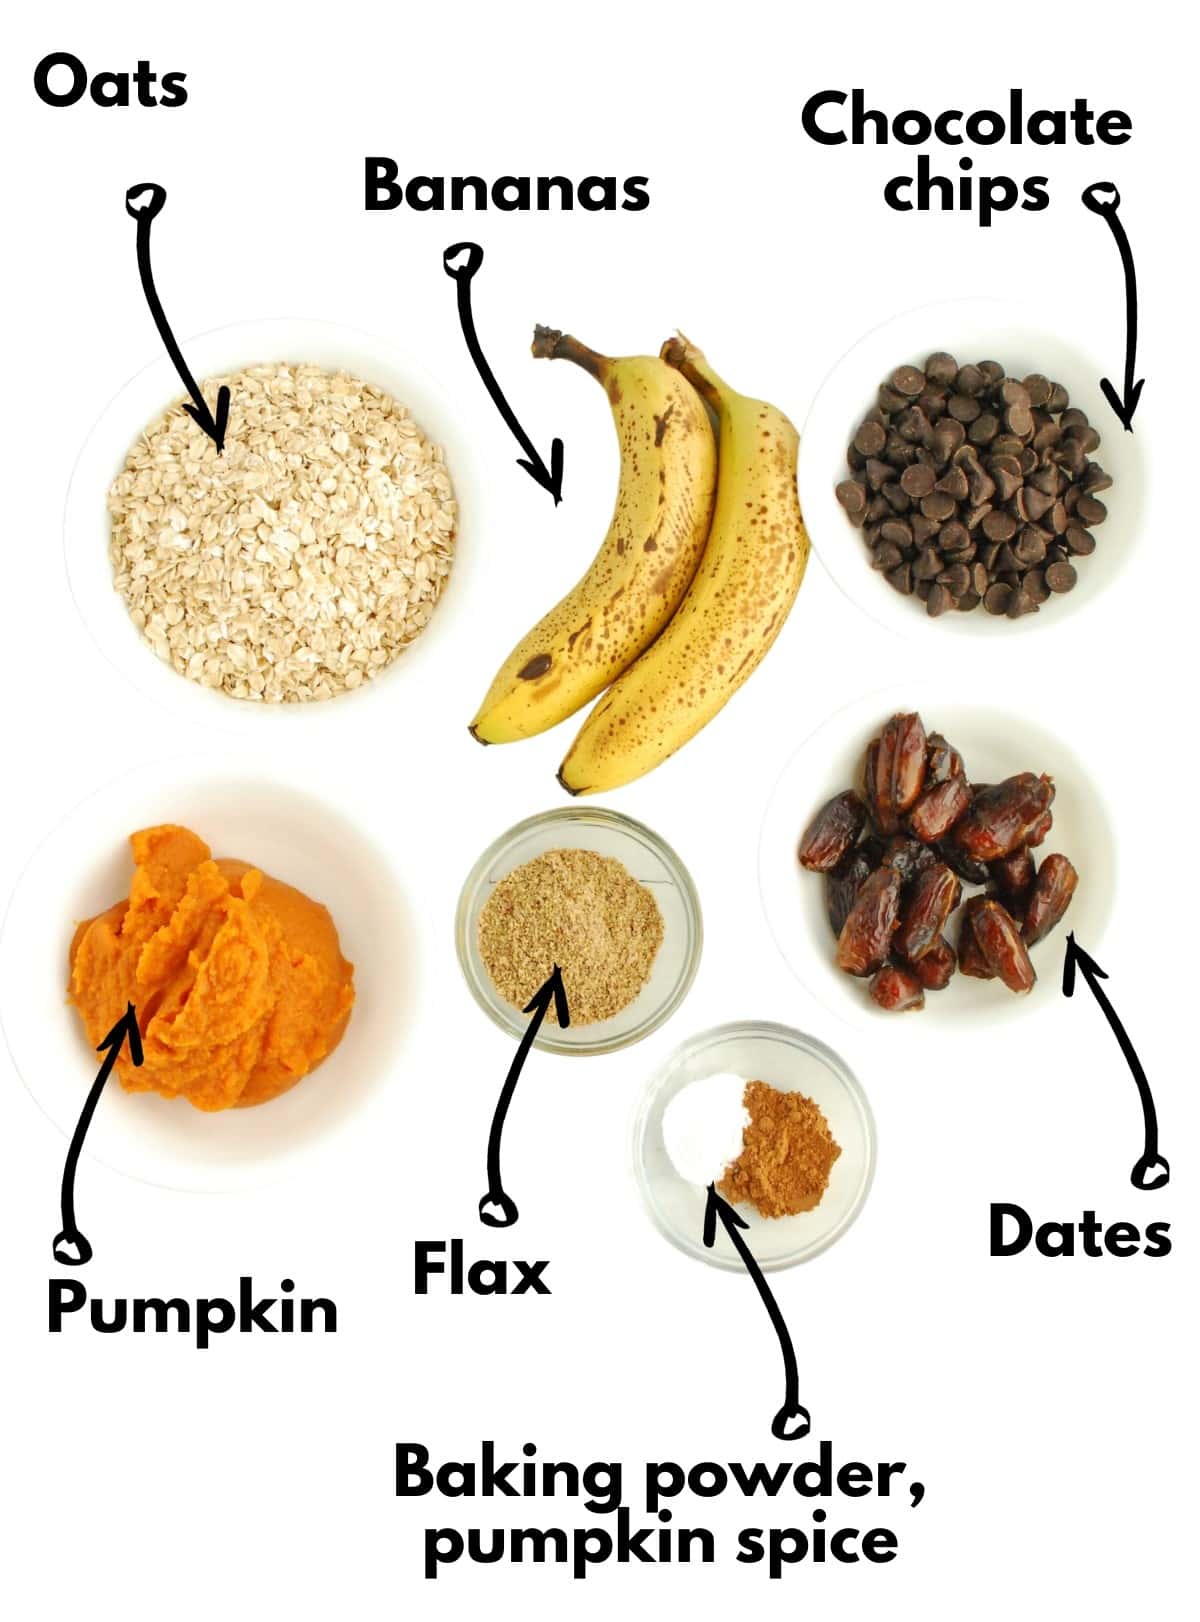 Oats, bananas, chocolate chips, pumpkin, flax, baking powder, pumpkin spice, and dates on a white backdrop.